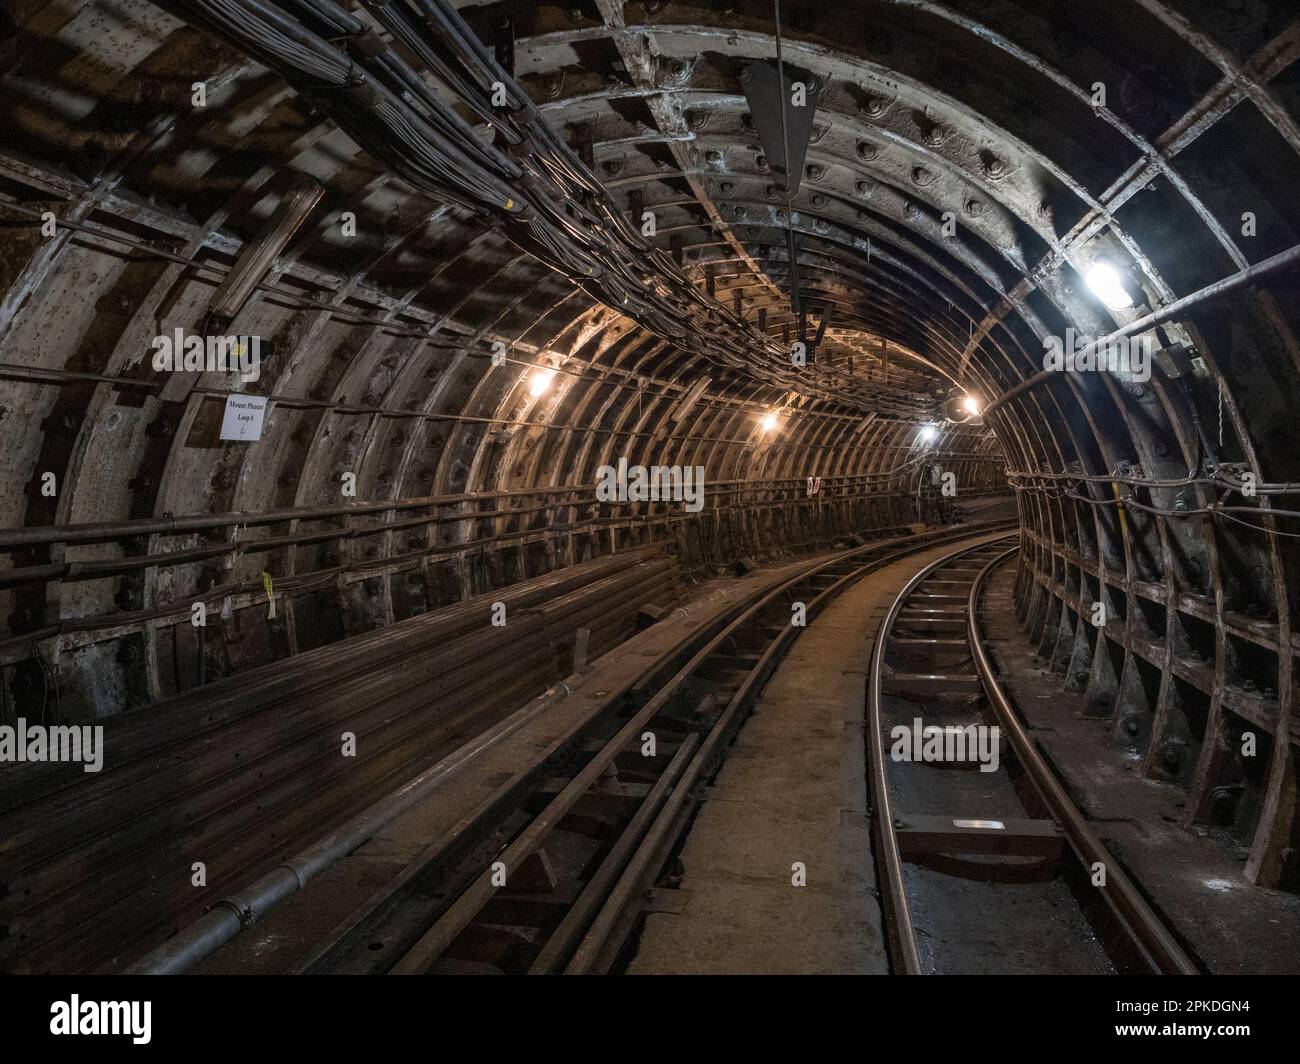 General view inside a tunnel of Mail Rail, the former  Post Office Railway system under the streets of central London, England. Stock Photo